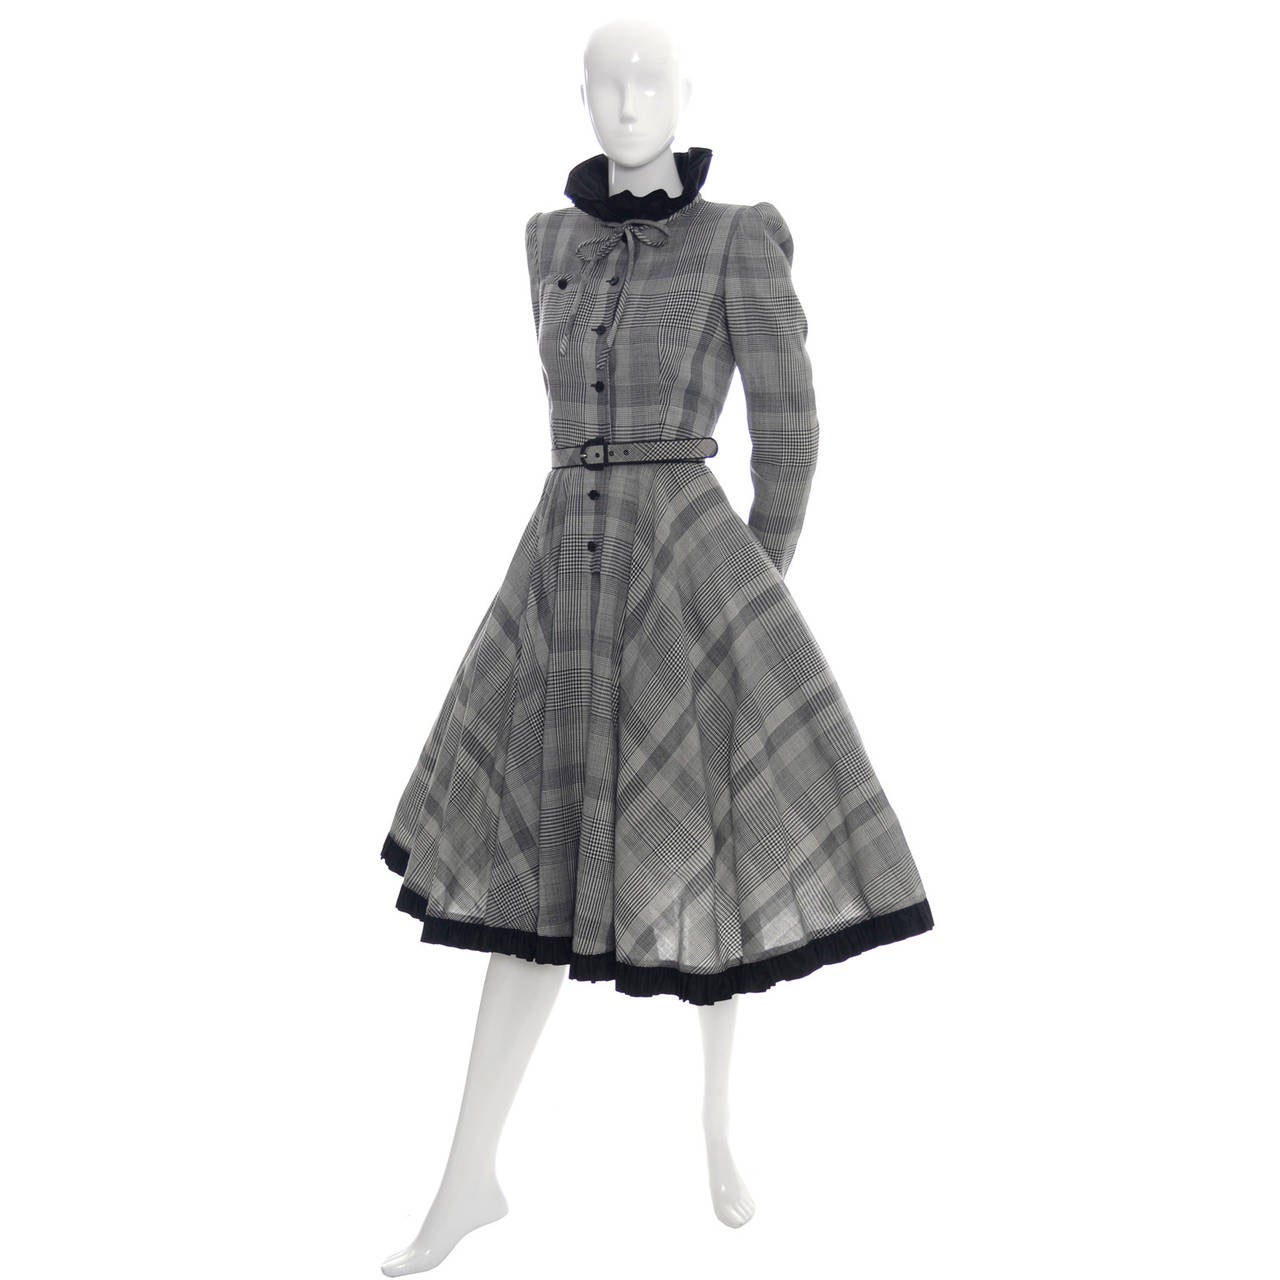 This is a vintage Valentino Boutique hounds tooth plaid wool dress from the  very early 1980's. The dress is in excellent condition, has its original belt and black satin trim at the hemline, cuffs and collar. The dress buttons up the front and also